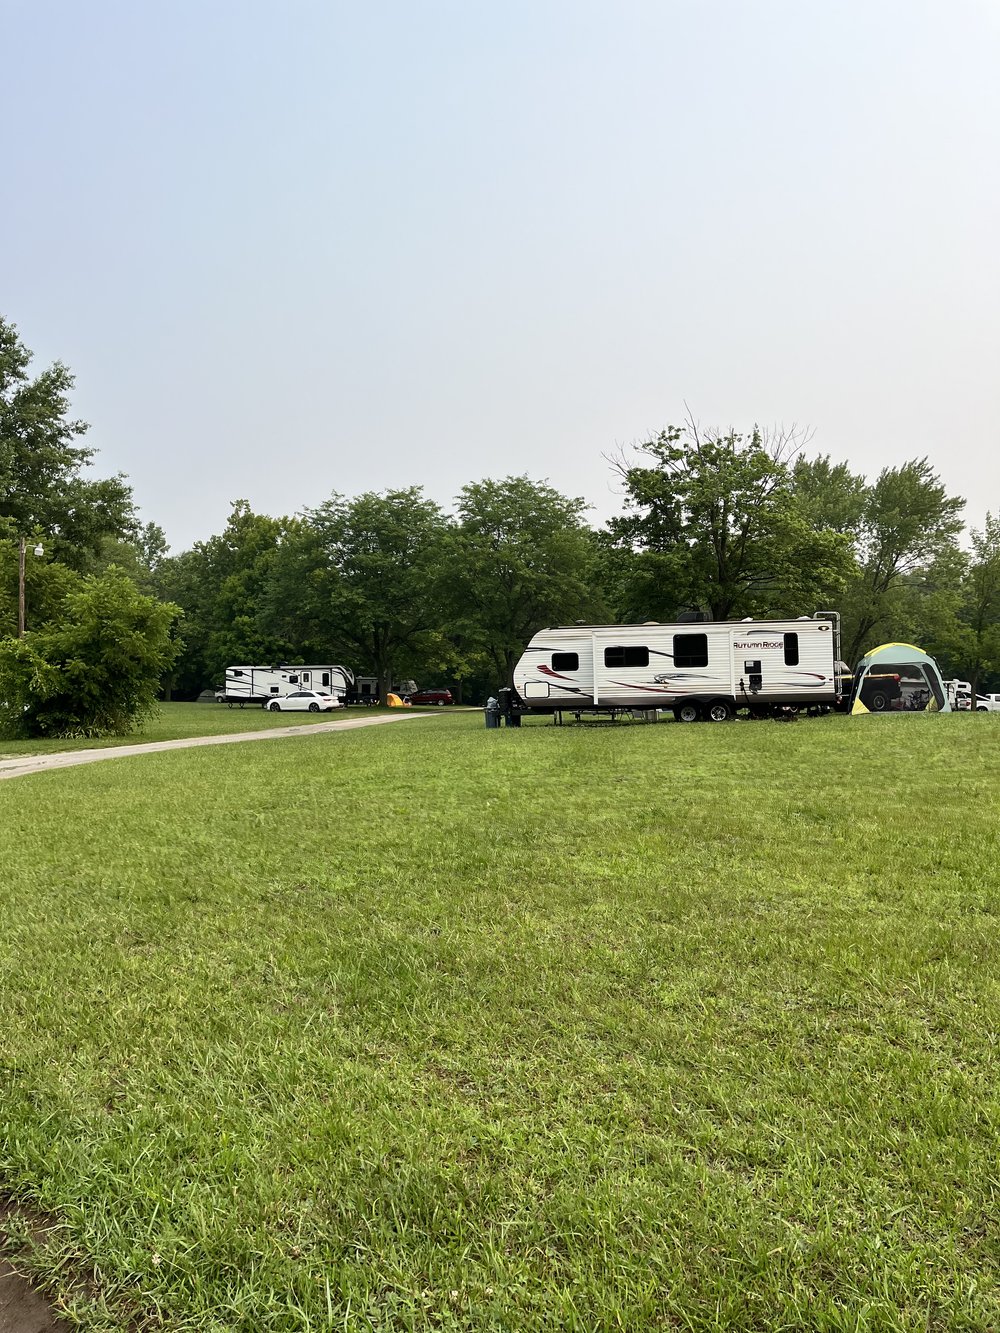 Sand creek campground camping area Indiana.jpg